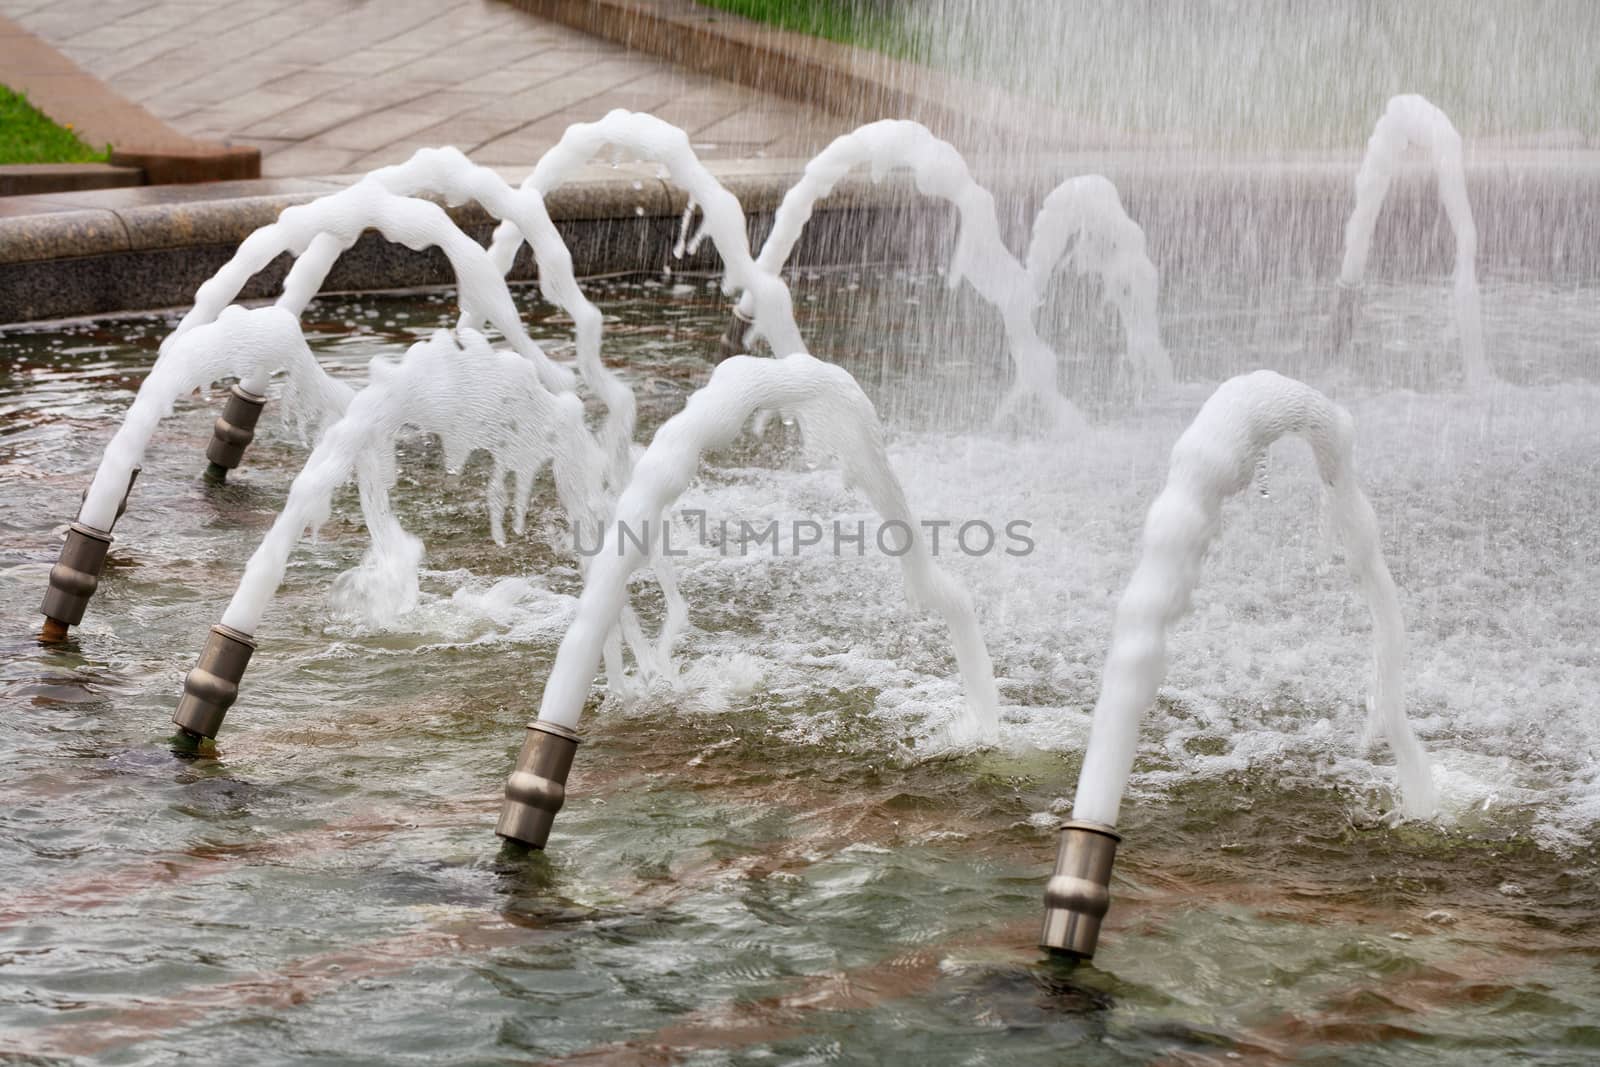 In the city fountain, metal cannons create a beautiful water carousel of foaming jets of water that powerfully burst to the surface.